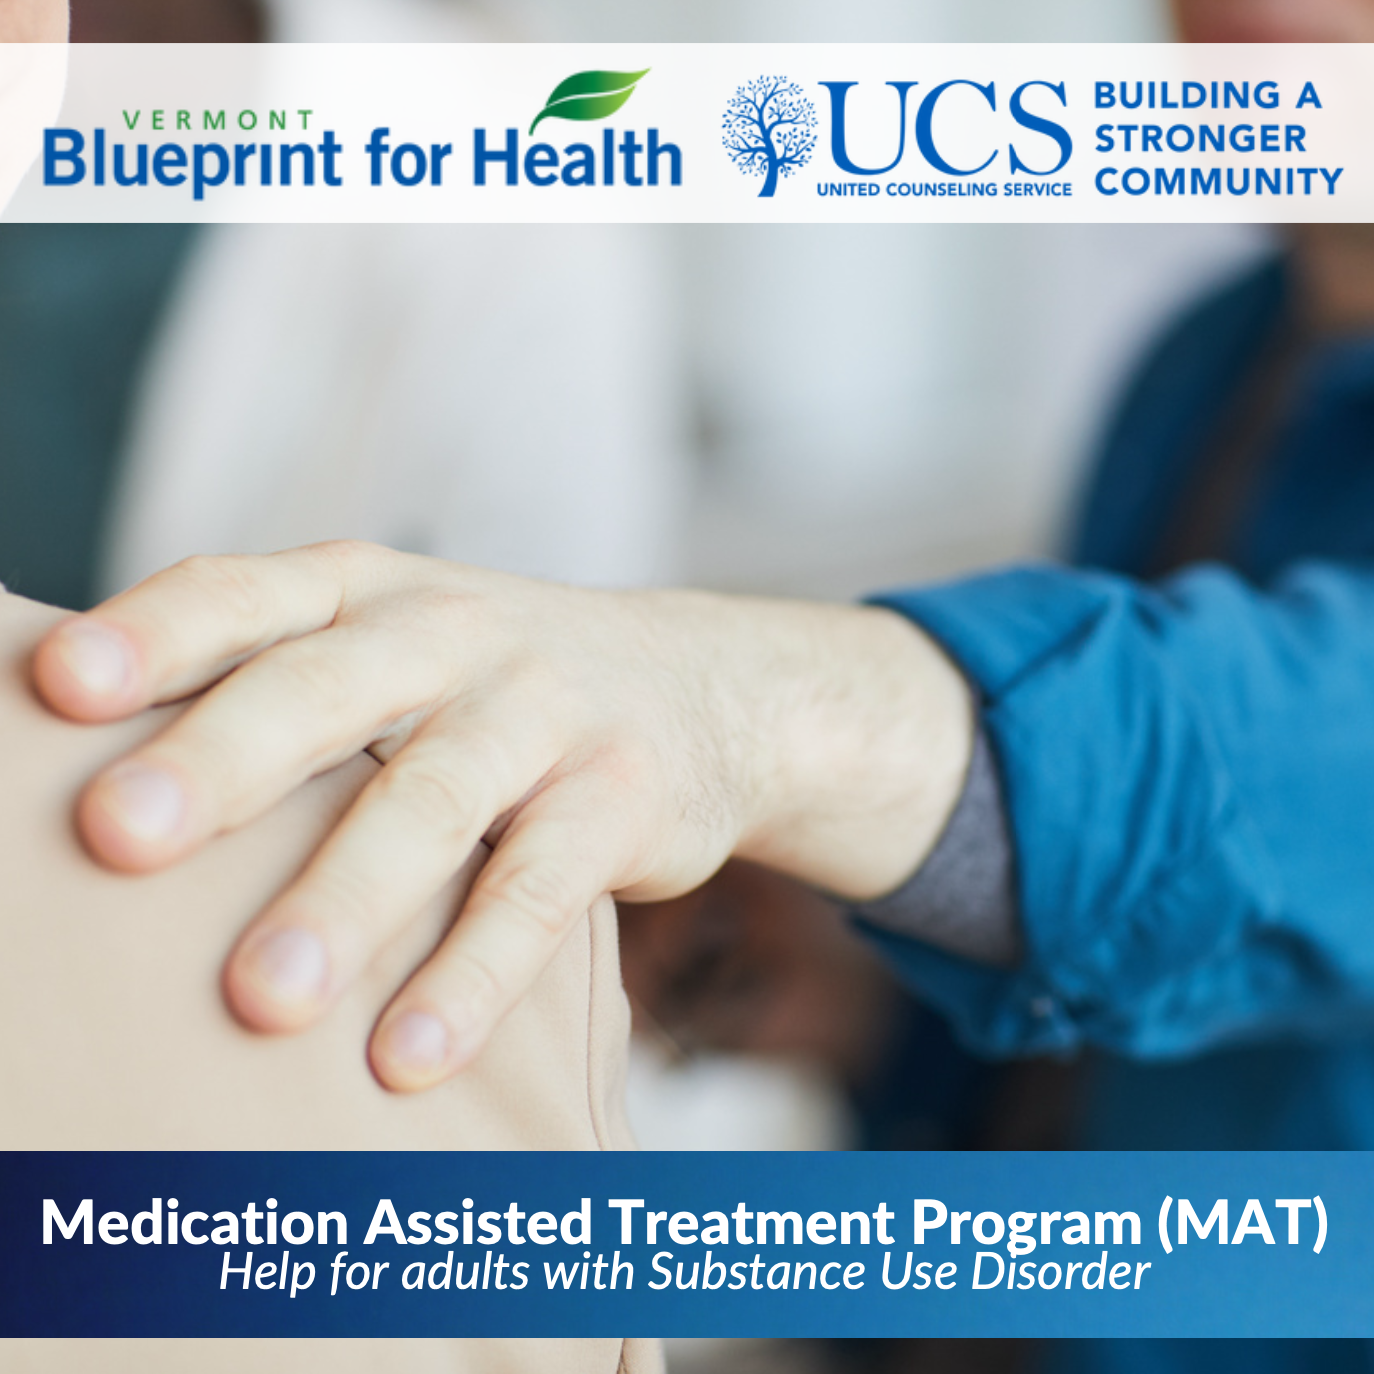 Medication Assisted Treatment (MAT) program at UCS expands across Bennington County into Northshire